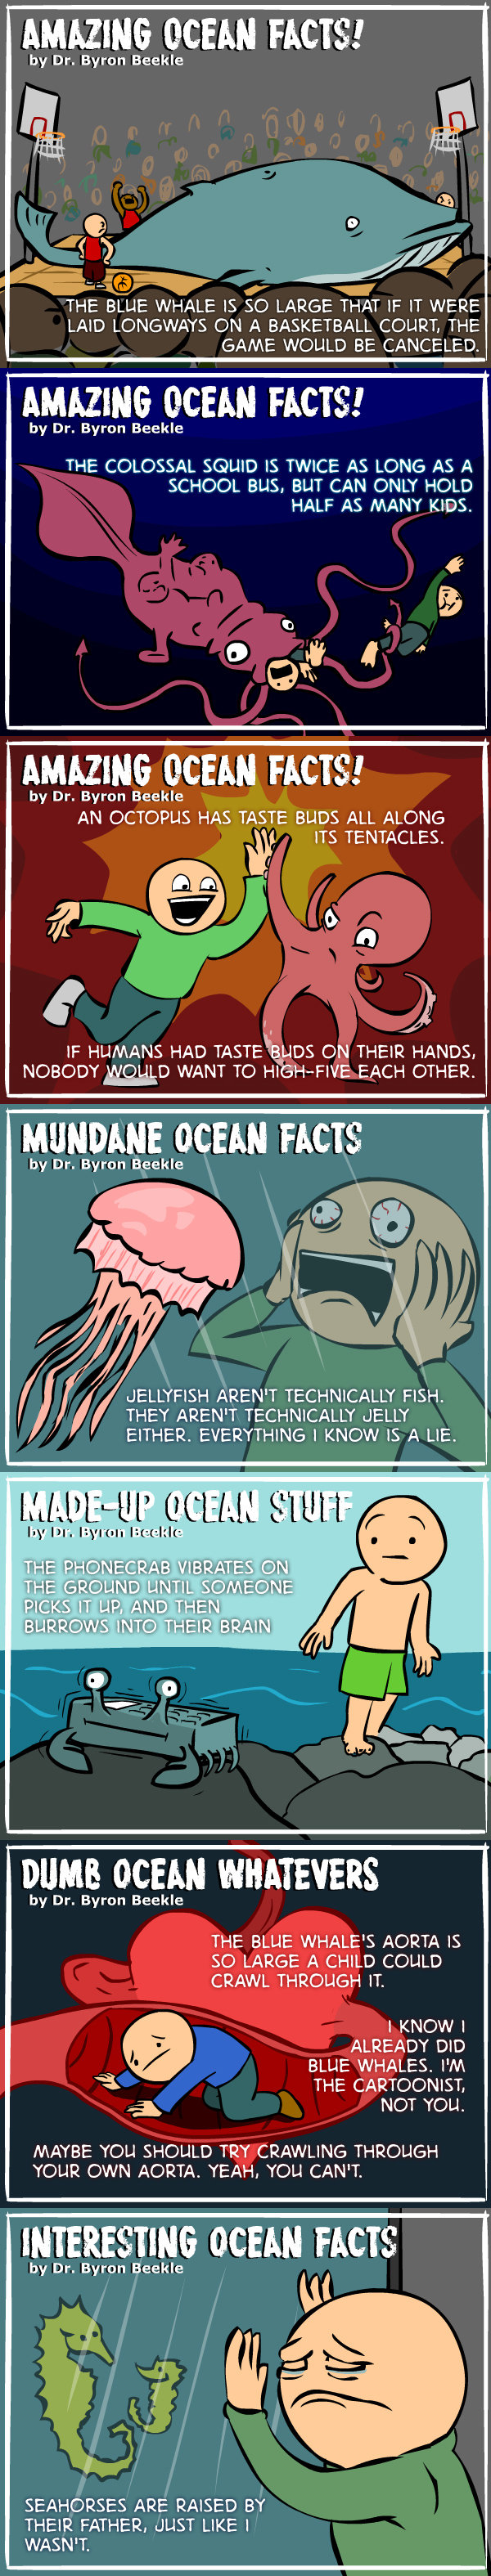 Real Ocean Facts. Let them sink in slowly..